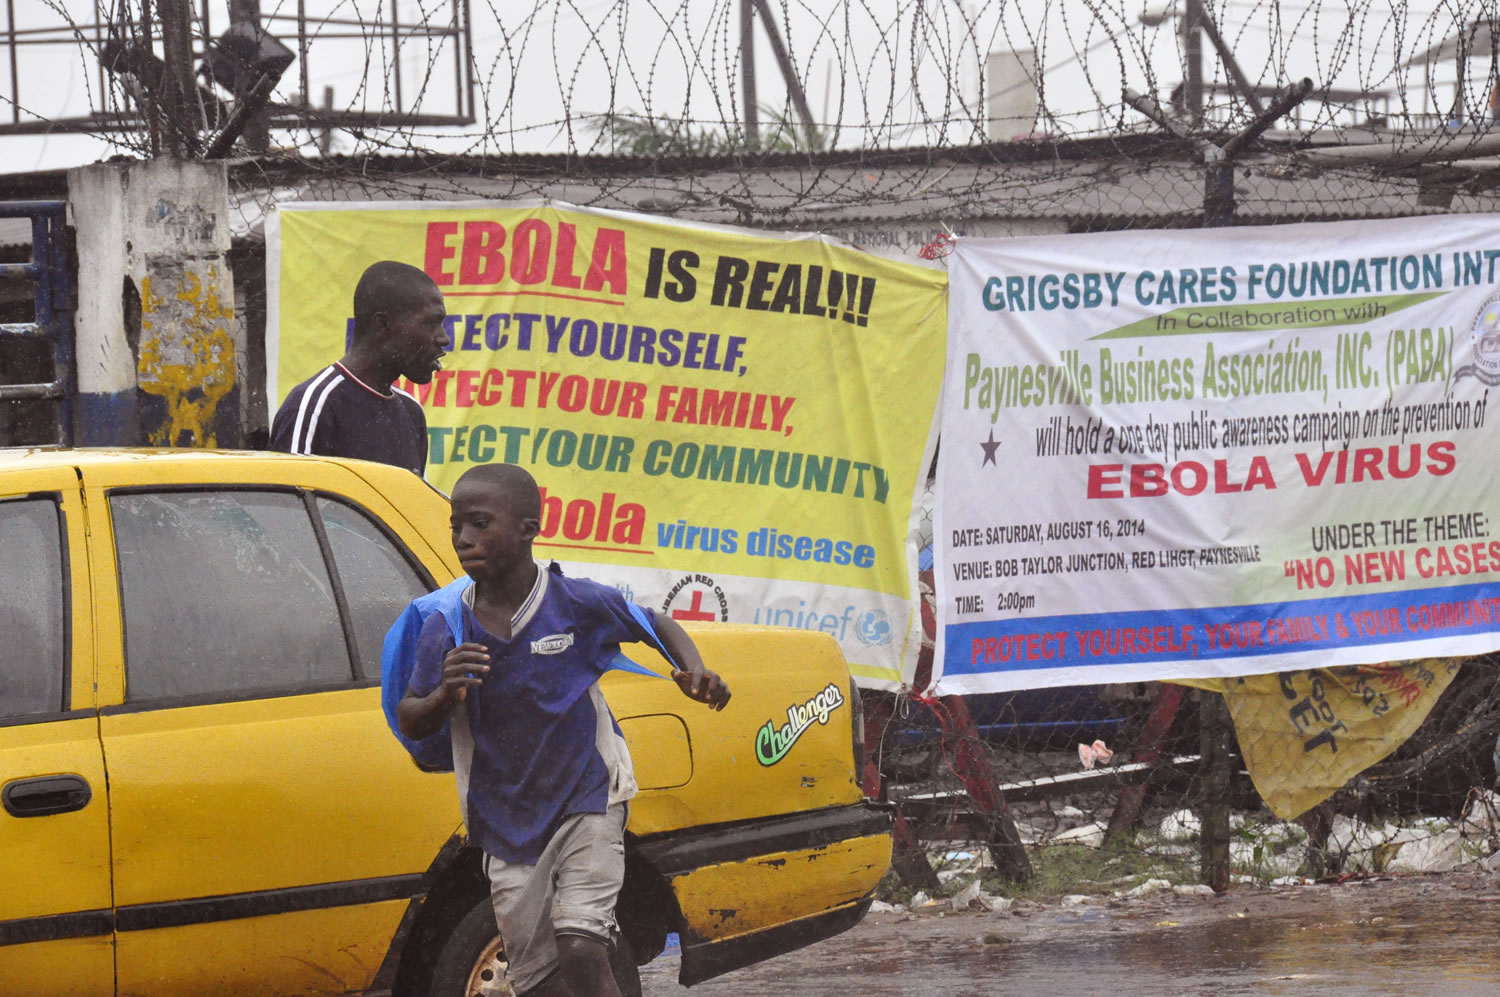 People pass by Ebola virus health warning signs, in the city of Monrovia, Liberia, on Sunday. Liberian officials fear Ebola could soon spread through the capital's largest slum after residents raided a quarantine center for suspected patients and took items including blood-stained sheets and mattresses.